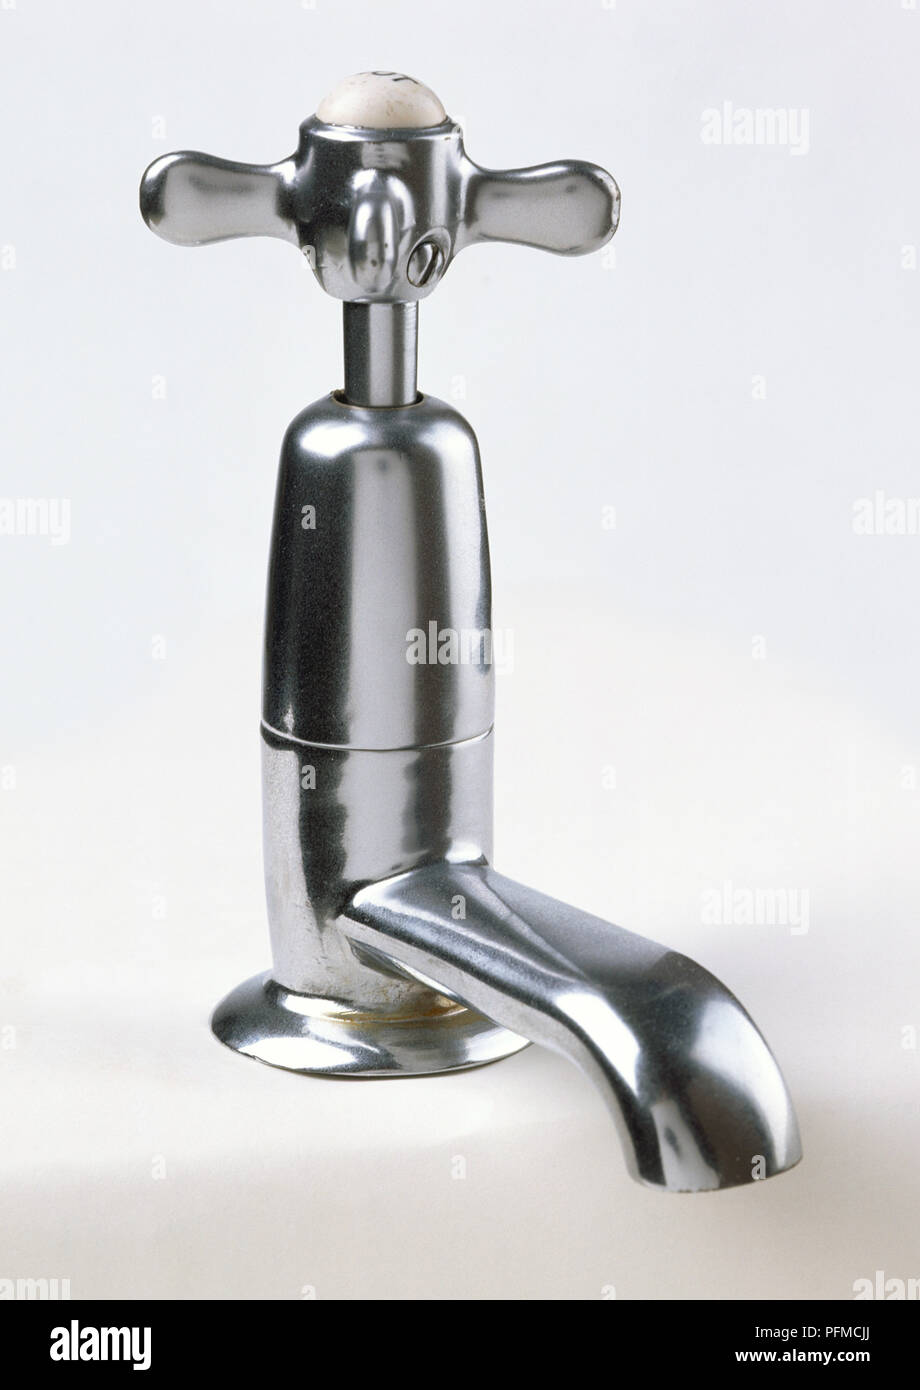 Chrome tap, simple classic design, angled front view. Stock Photo